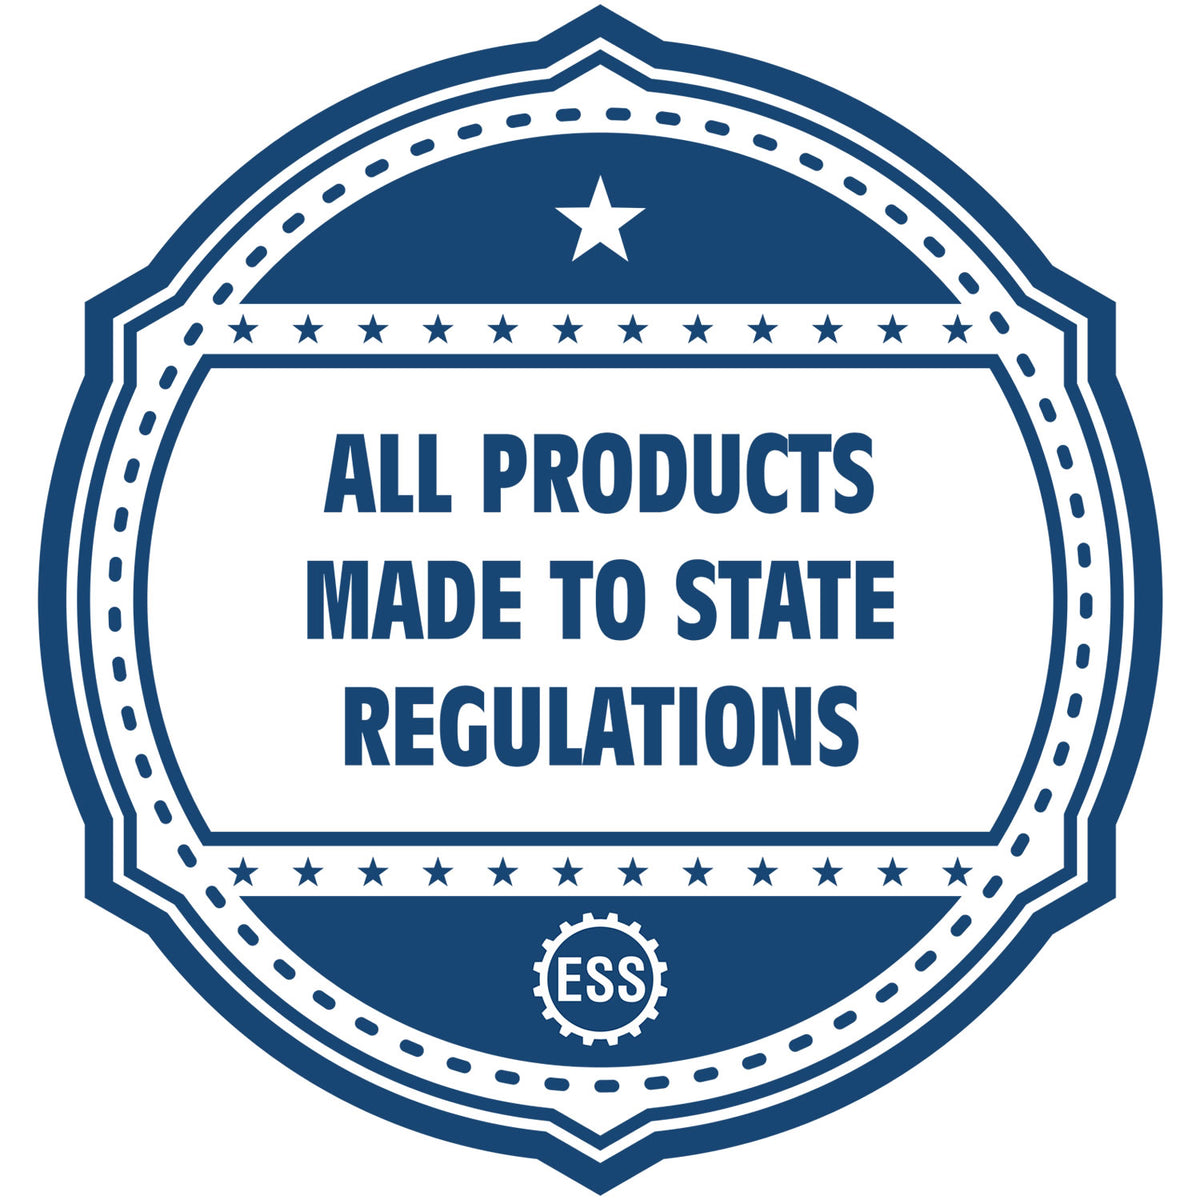 An icon or badge element for the Super Slim Missouri Notary Public Stamp showing that this product is made in compliance with state regulations.